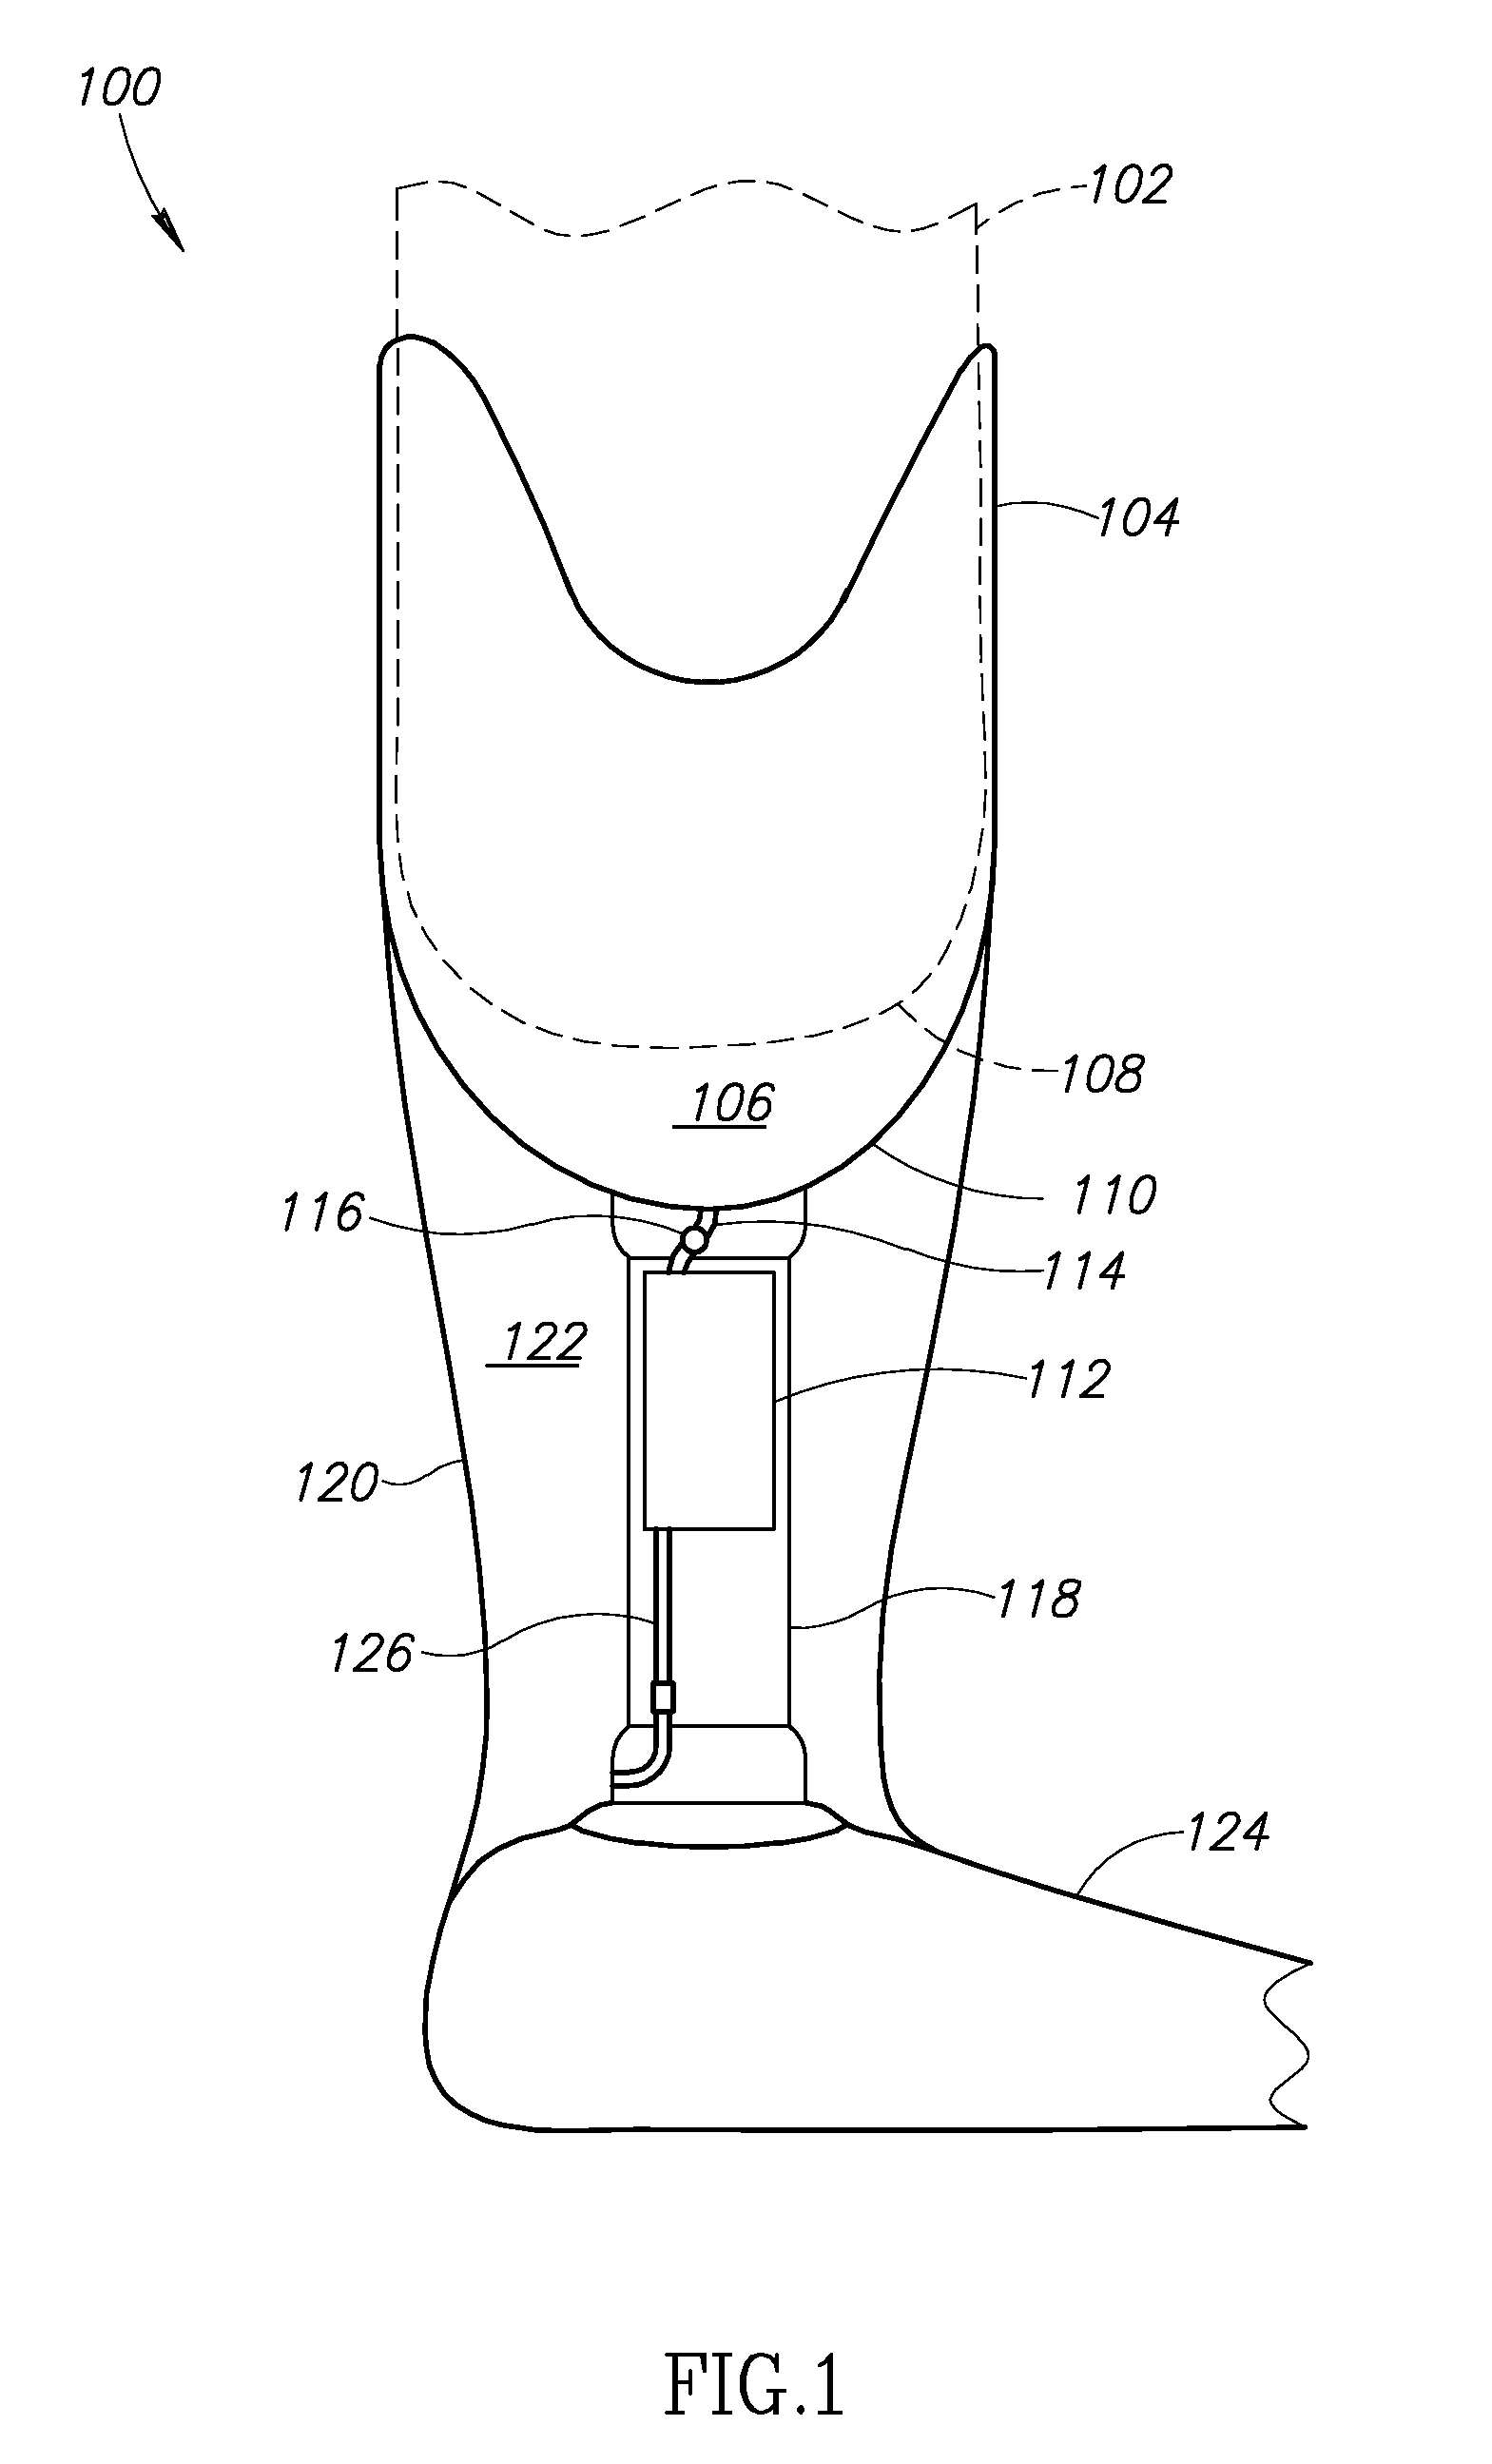 Control system for prosthesis